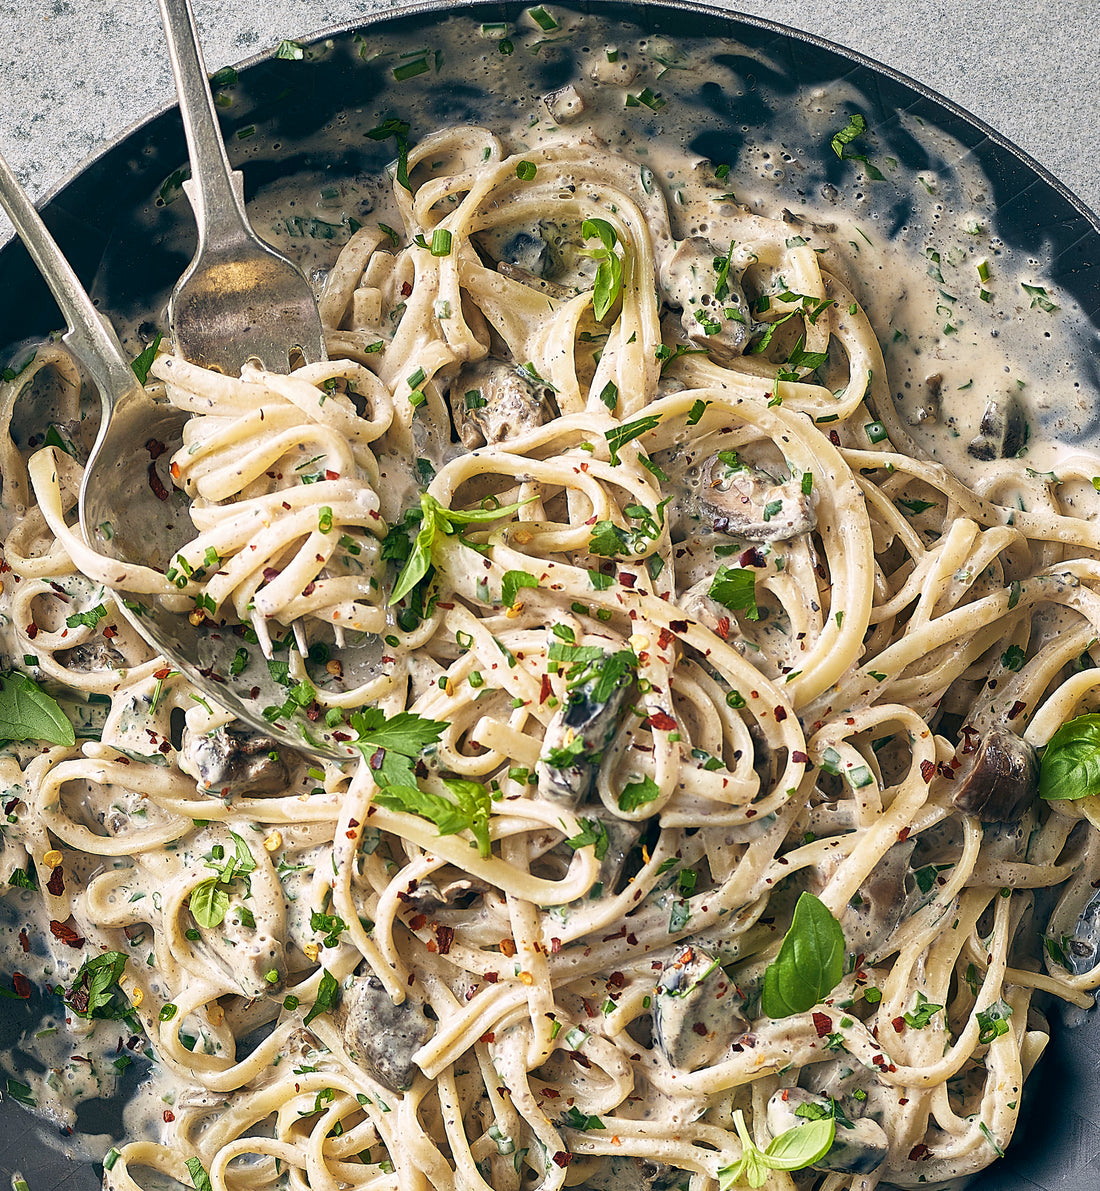 Linguine Coated with Pickled Walnut and Herbs